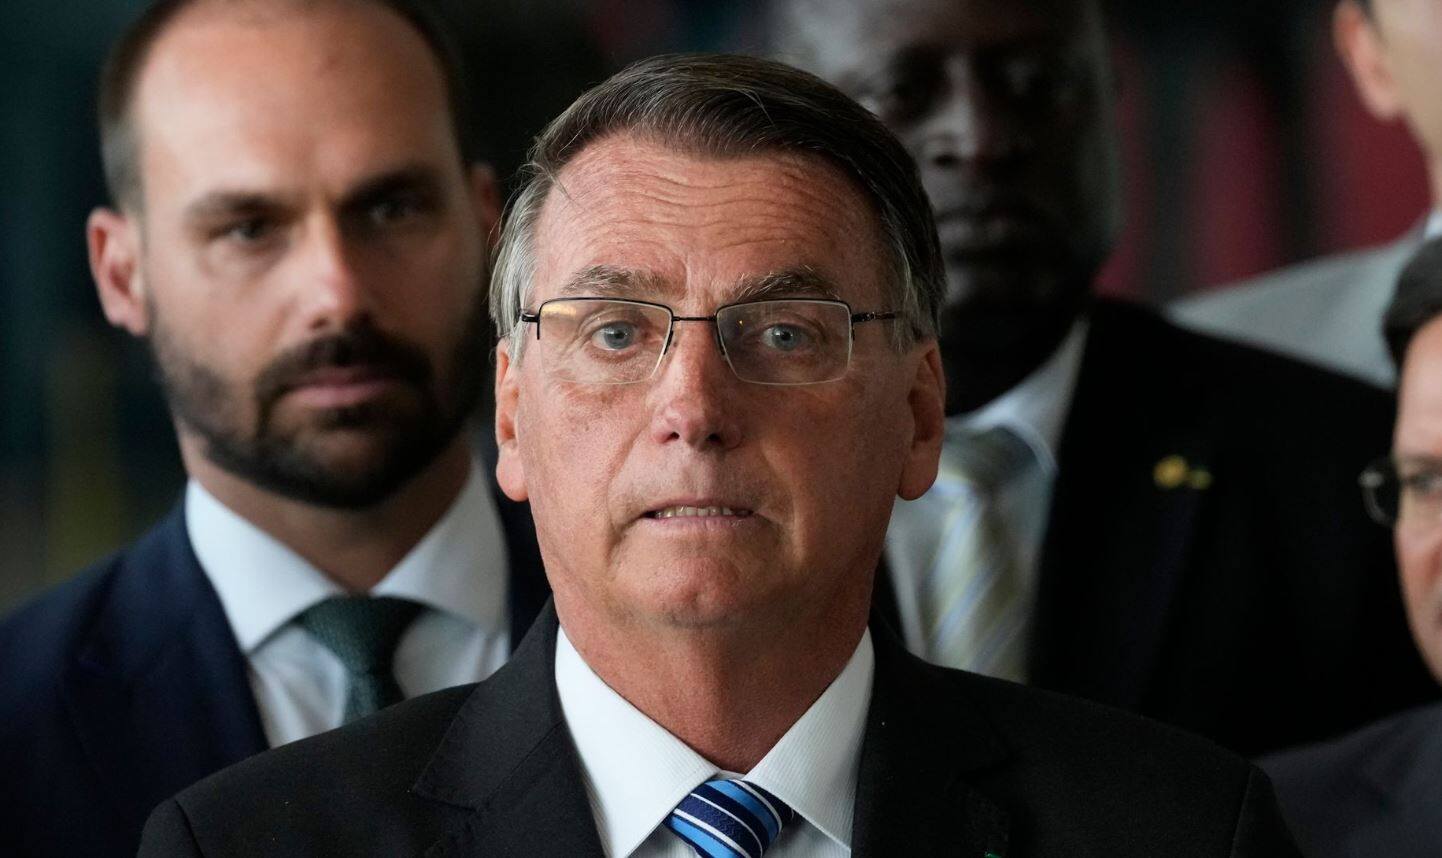 Two days after losing the election, Bolsonaro has shown his willingness to transition